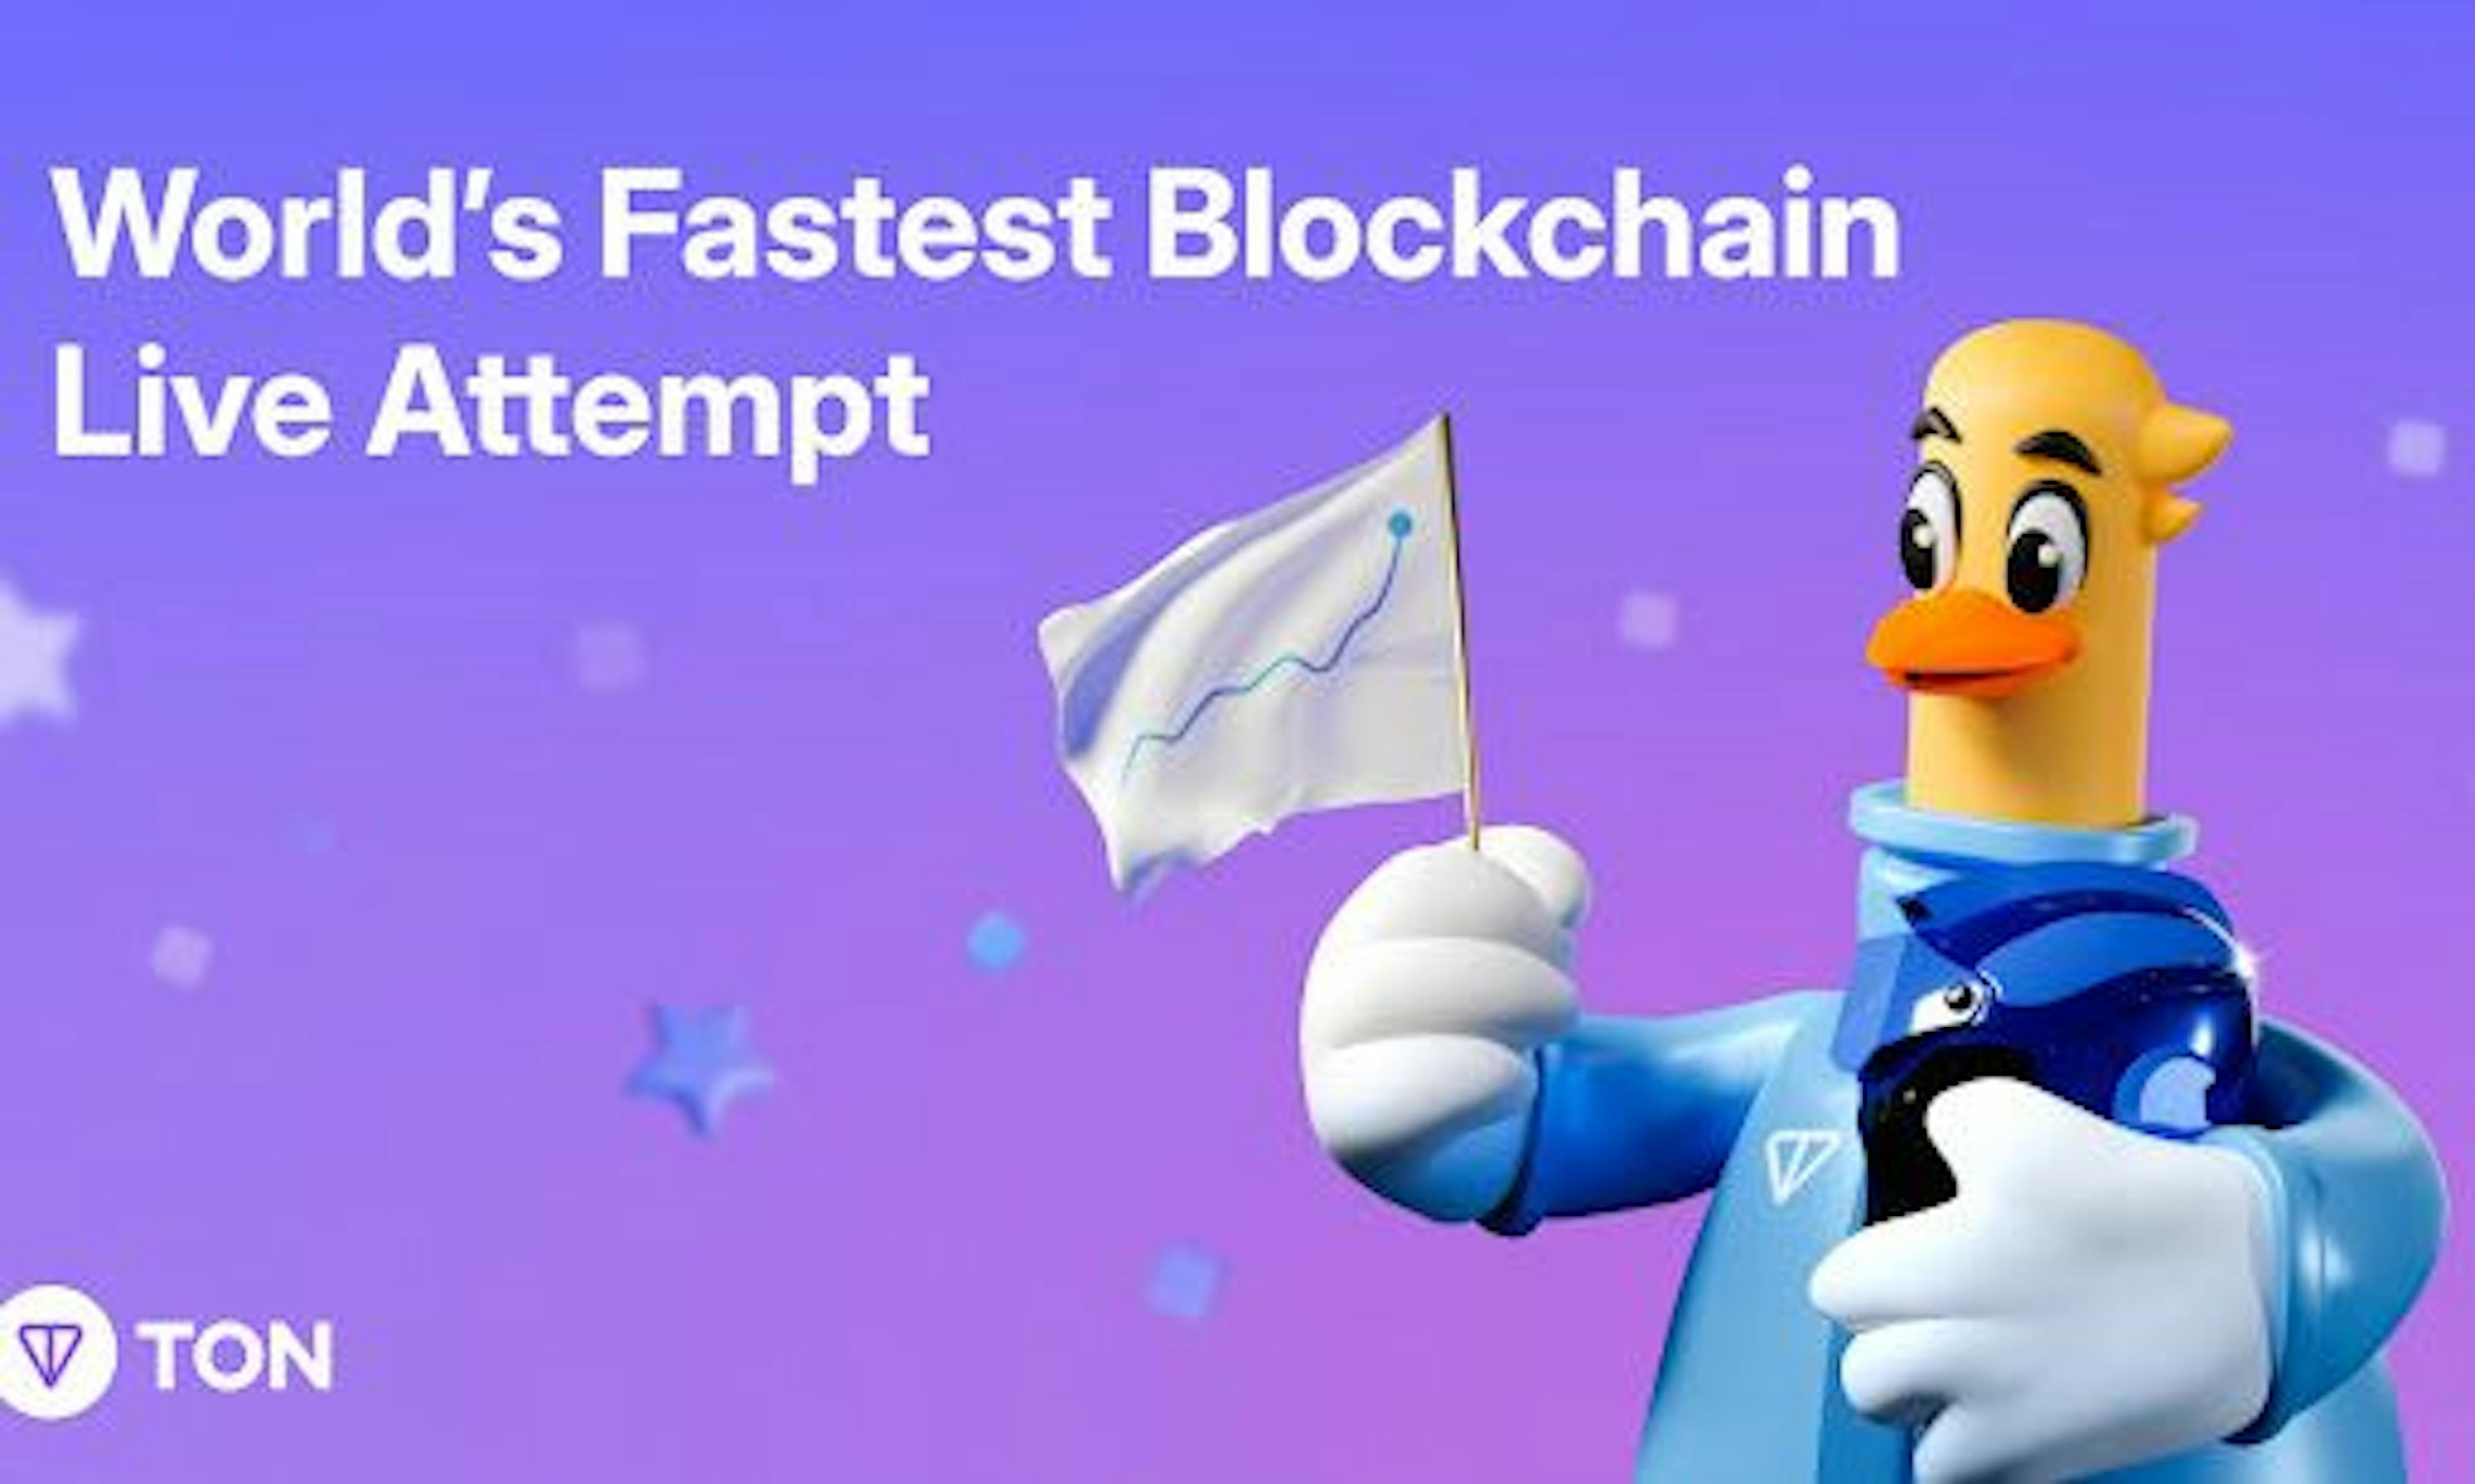 /the-open-network-ton-aims-to-set-world-record-for-fastest-blockchain feature image